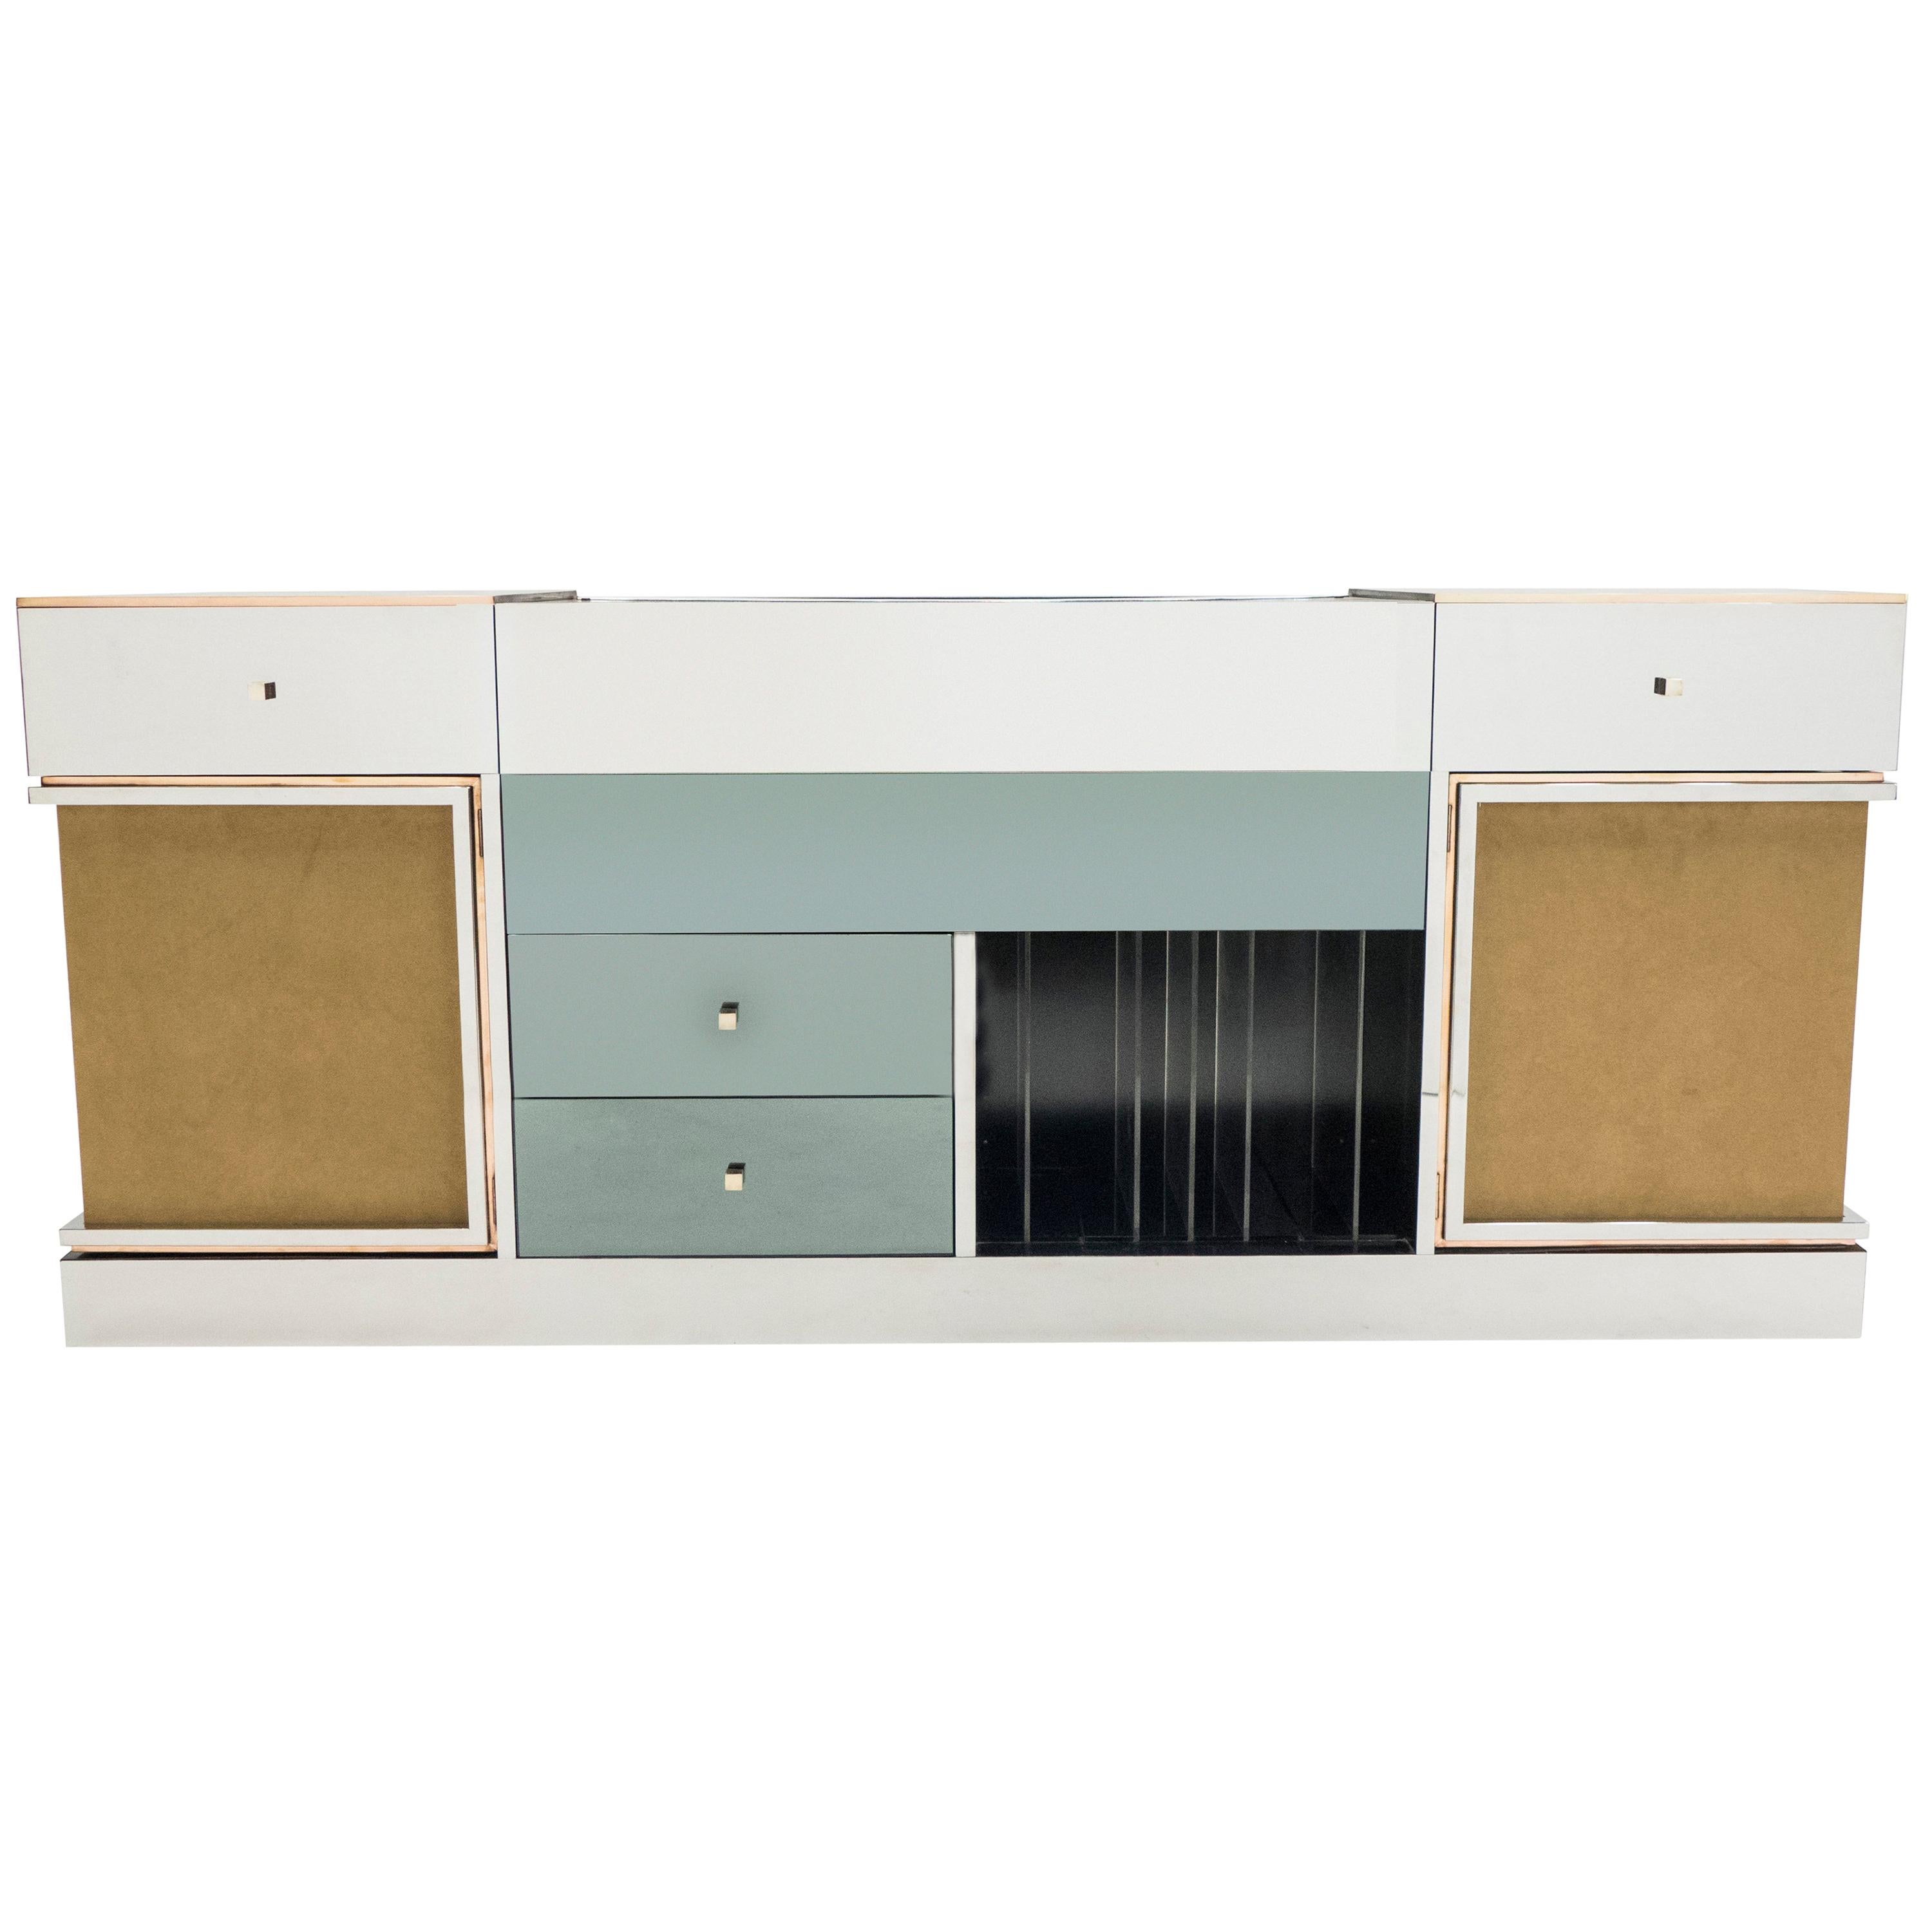 Rare and unique French Mid-Century Modern sideboard by Michel Pigneres made circa 1969. The sideboard, which was custom made with hifi equipment features, is an exquisite example of refined, highly detailed and very well made furniture. The mirrored